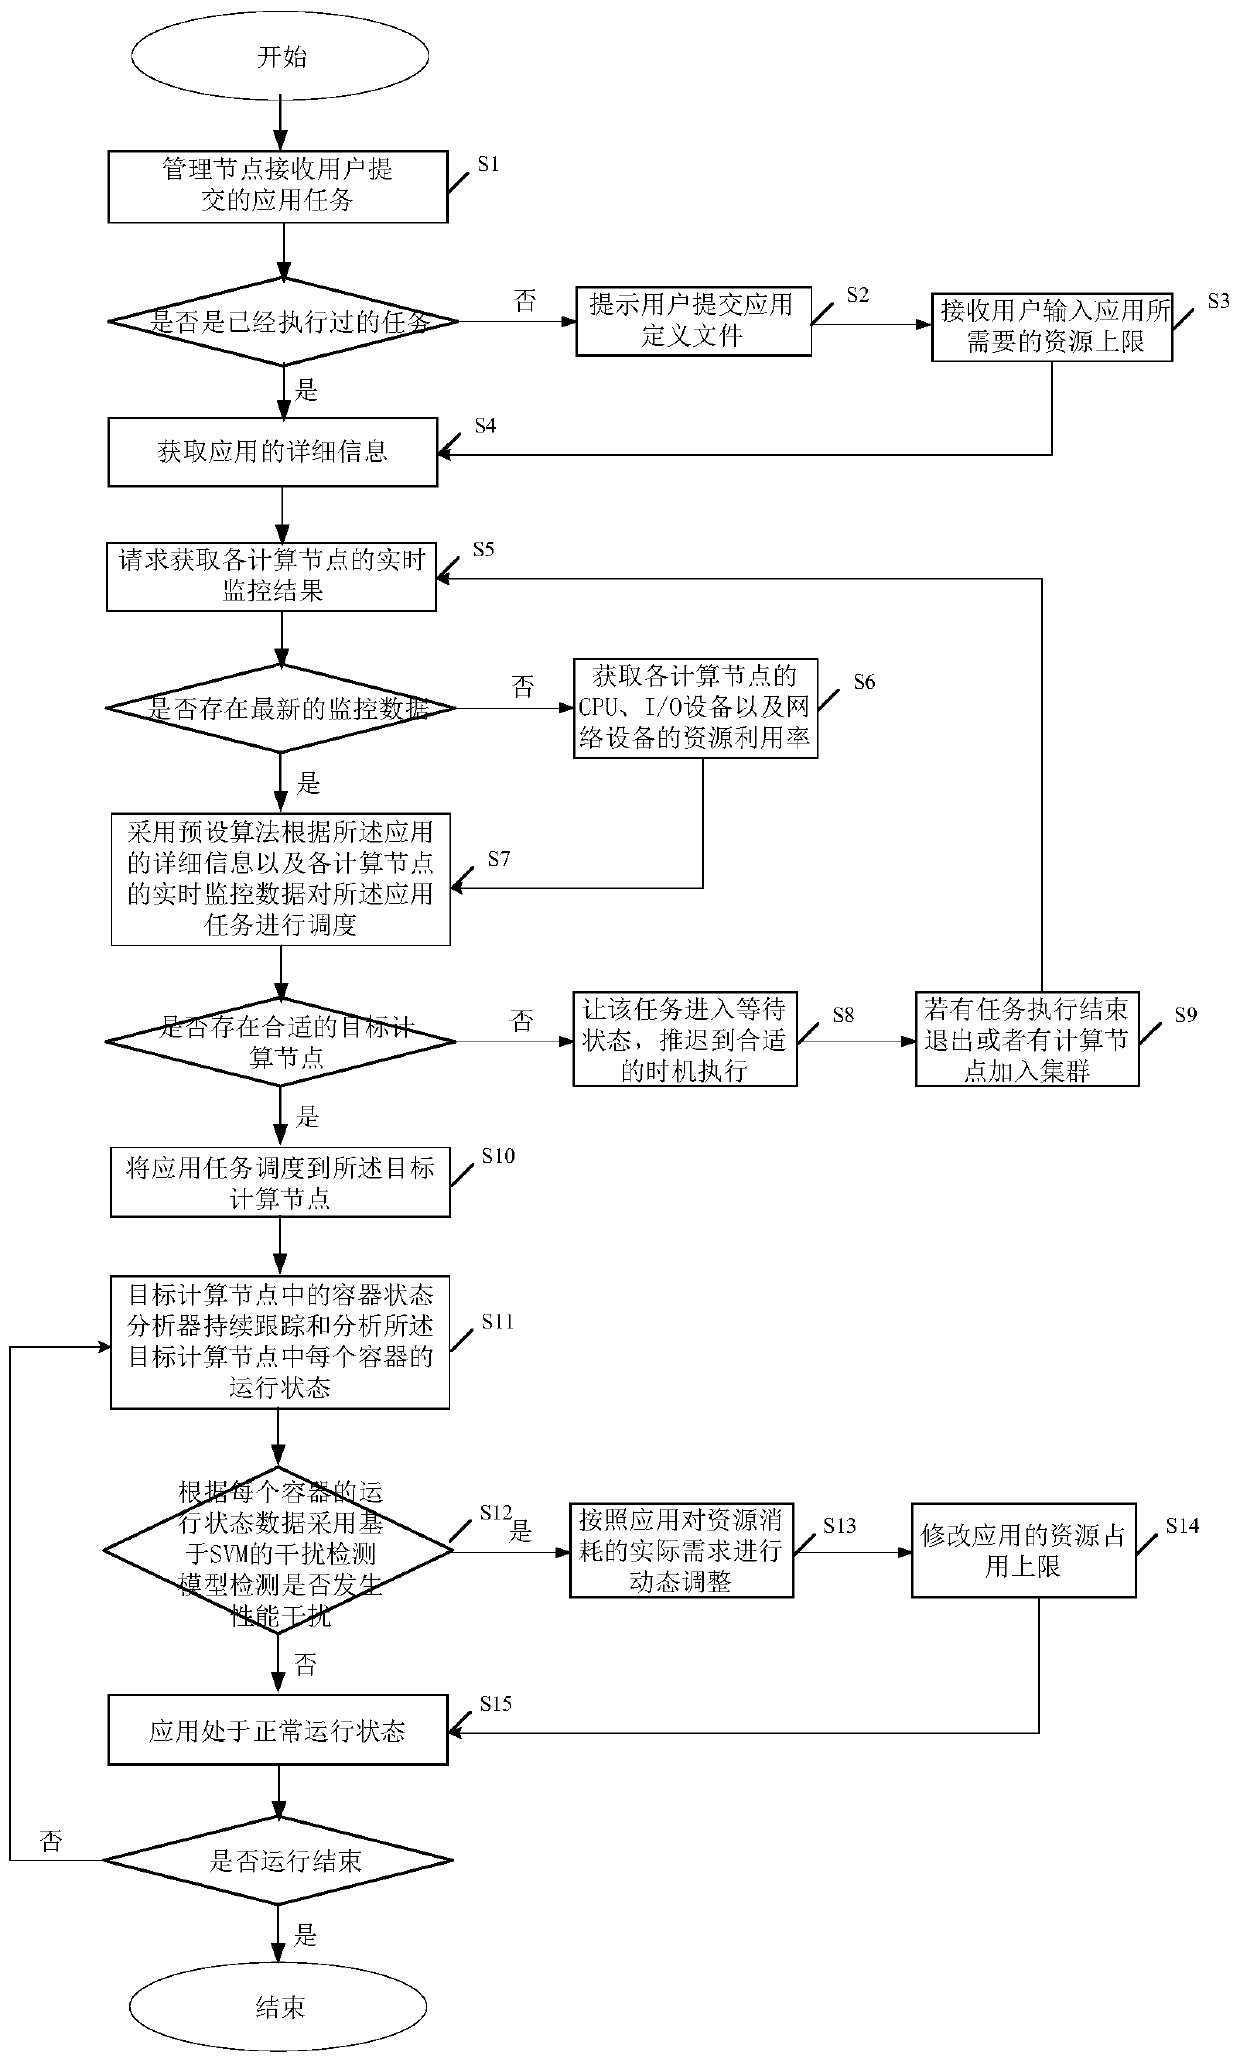 A containerized application-oriented resource management system and method